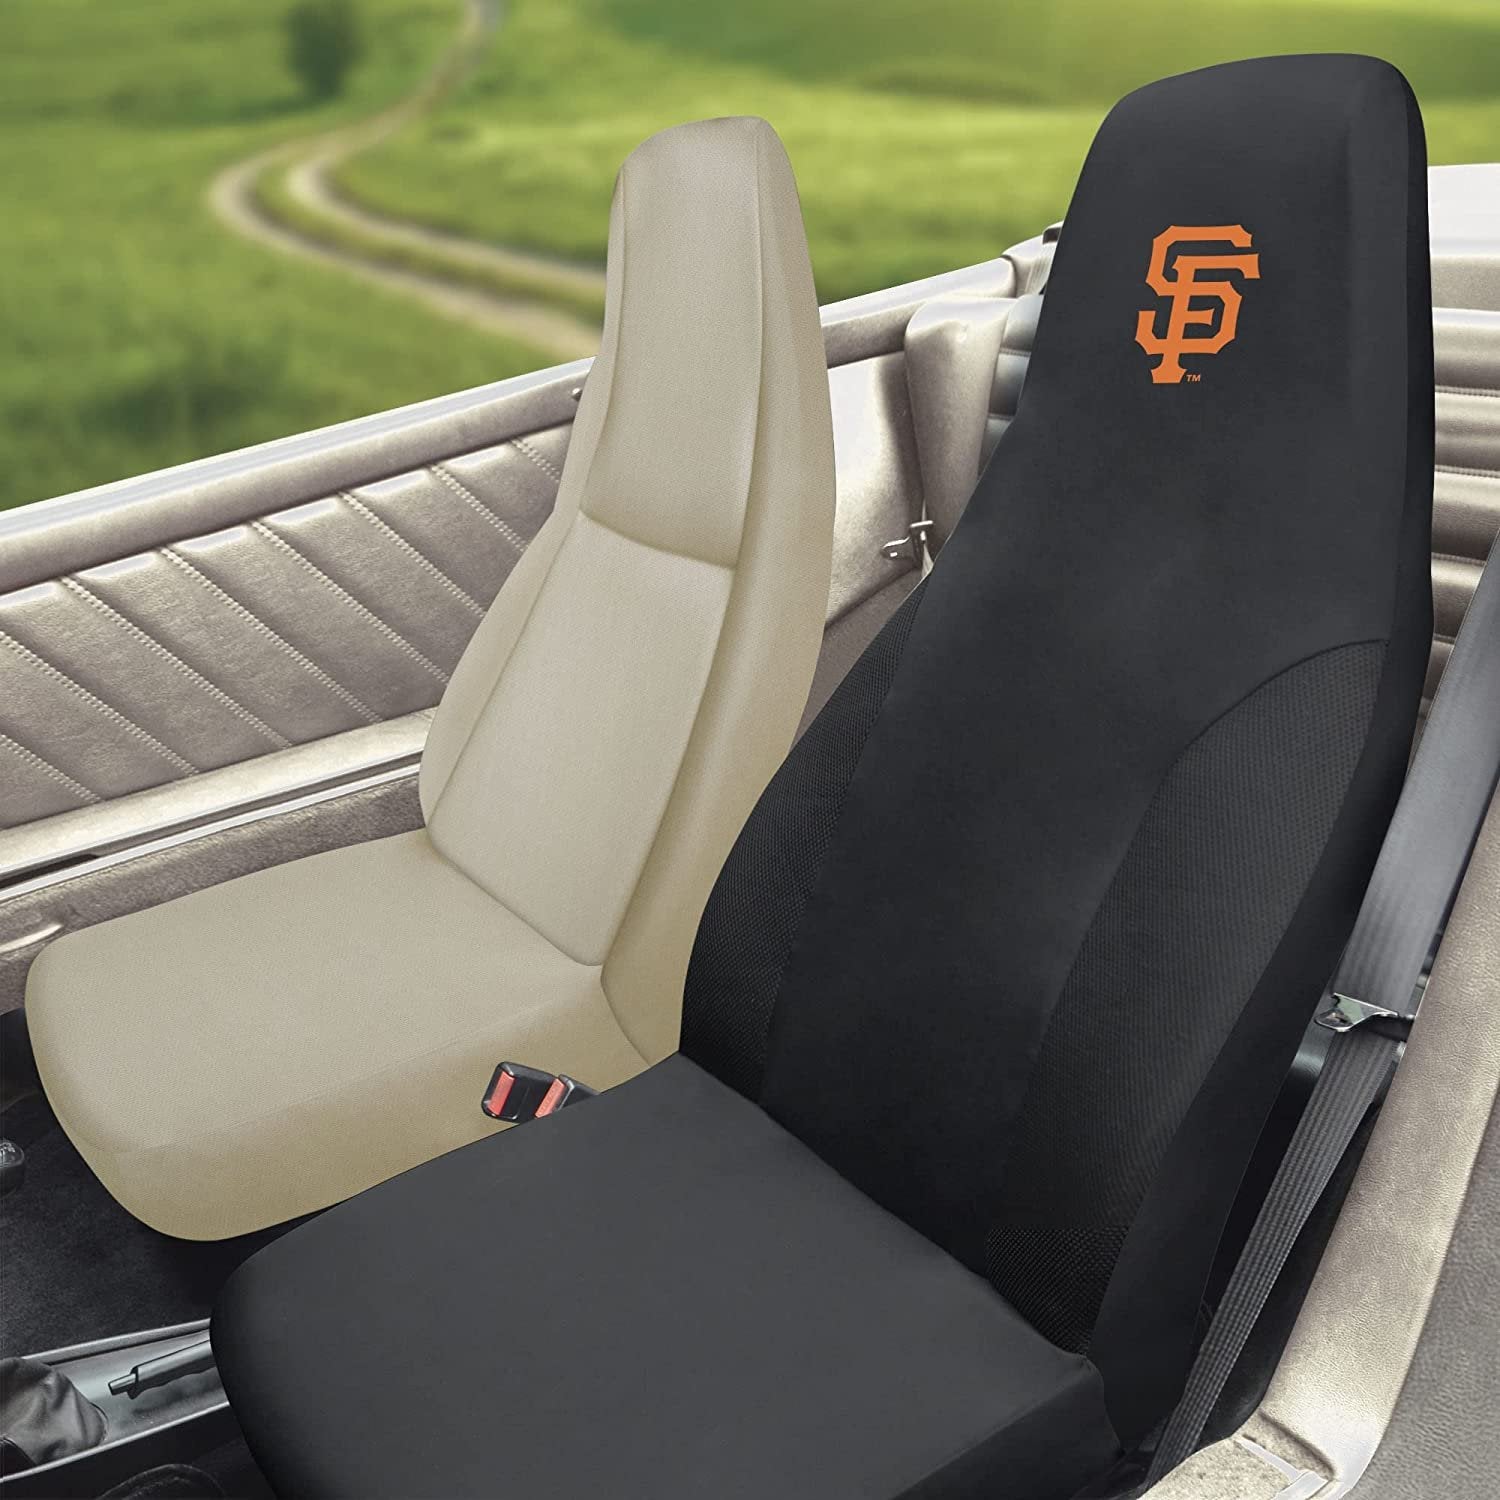 San Francisco Giants Embroidered Black Auto Bucket Seat Cover 48x20 Inch Elastic